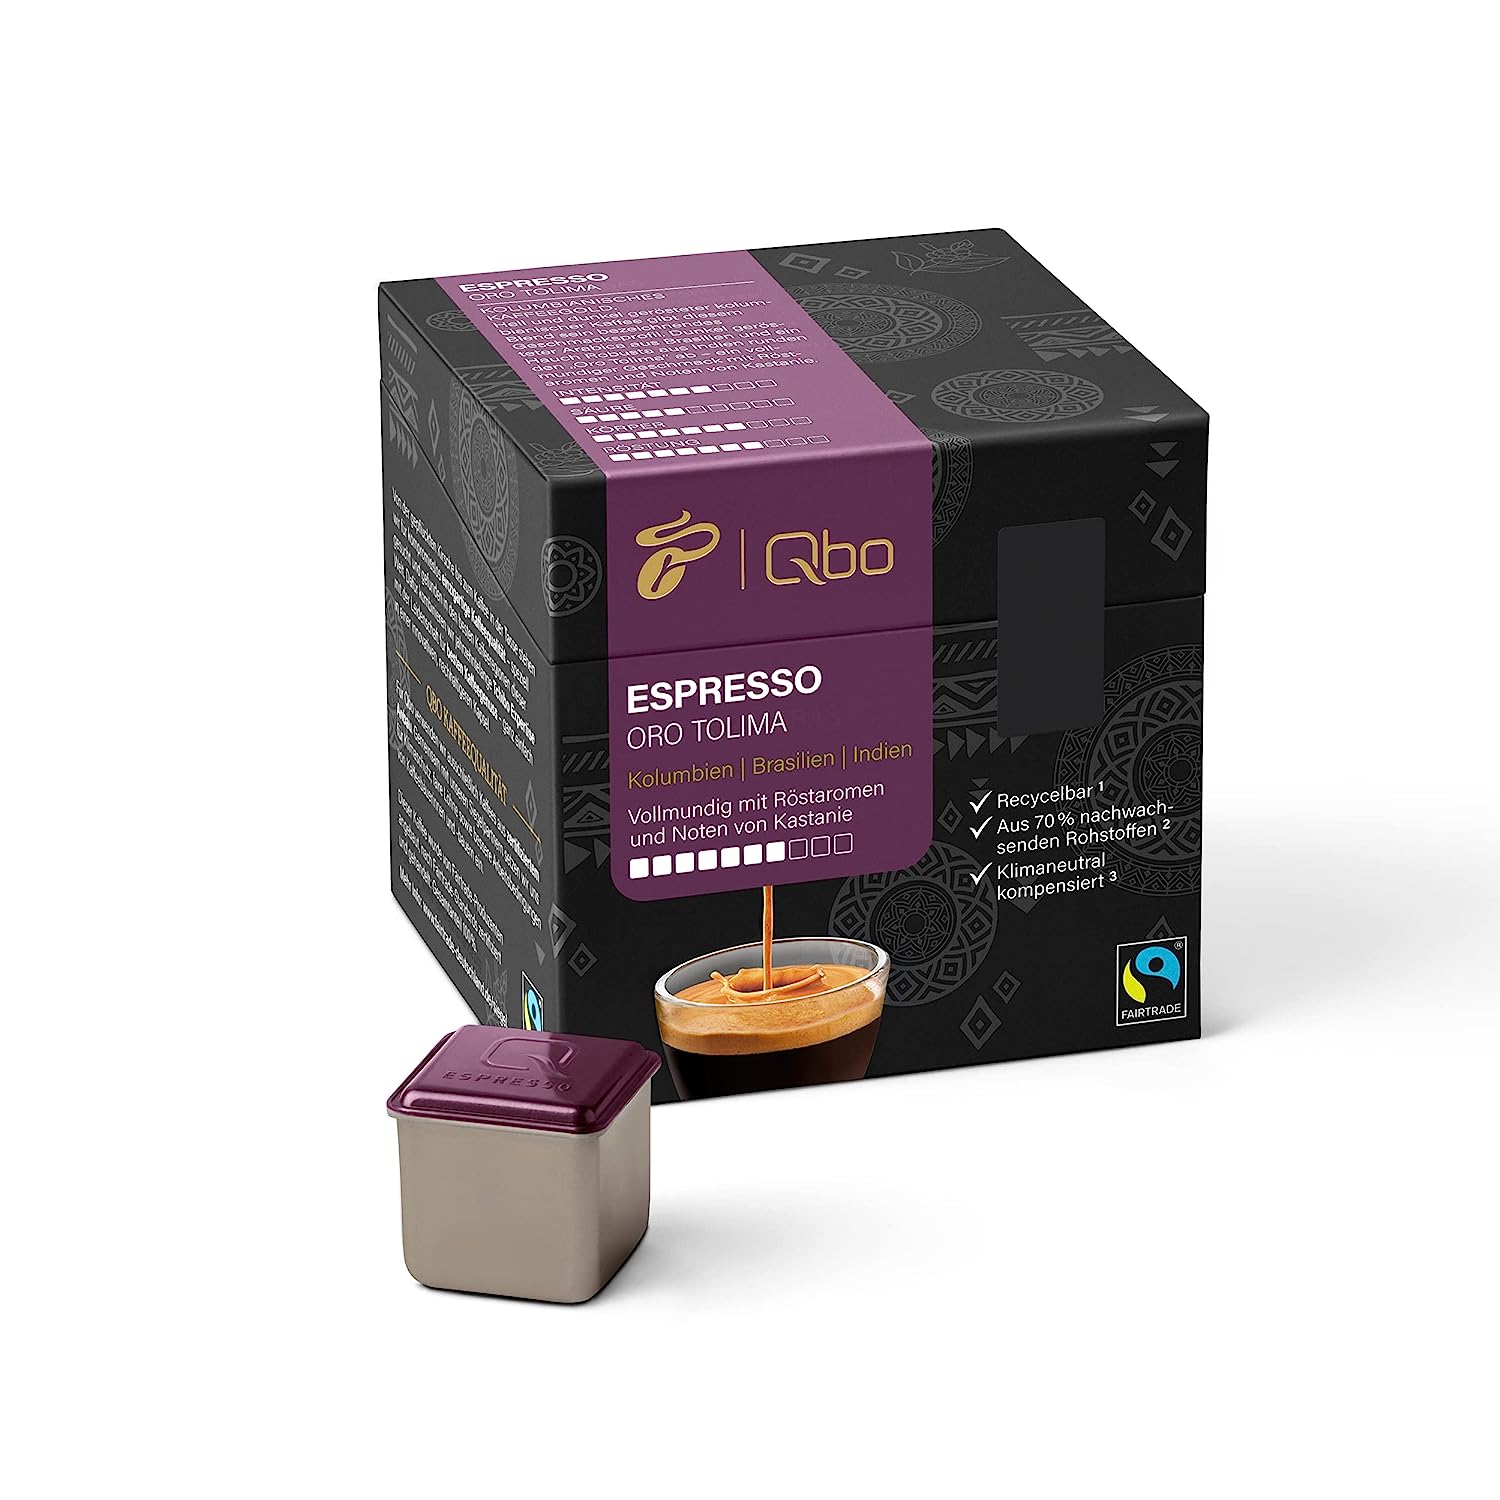 Tchibo qbo Espresso Oro Tolima Premium coffee capsules, 216 pieces - 8x27 capsules (espresso, intensity 7/10, full -bodied with roasted aromas), sustainable, from 70% renewable raw materials